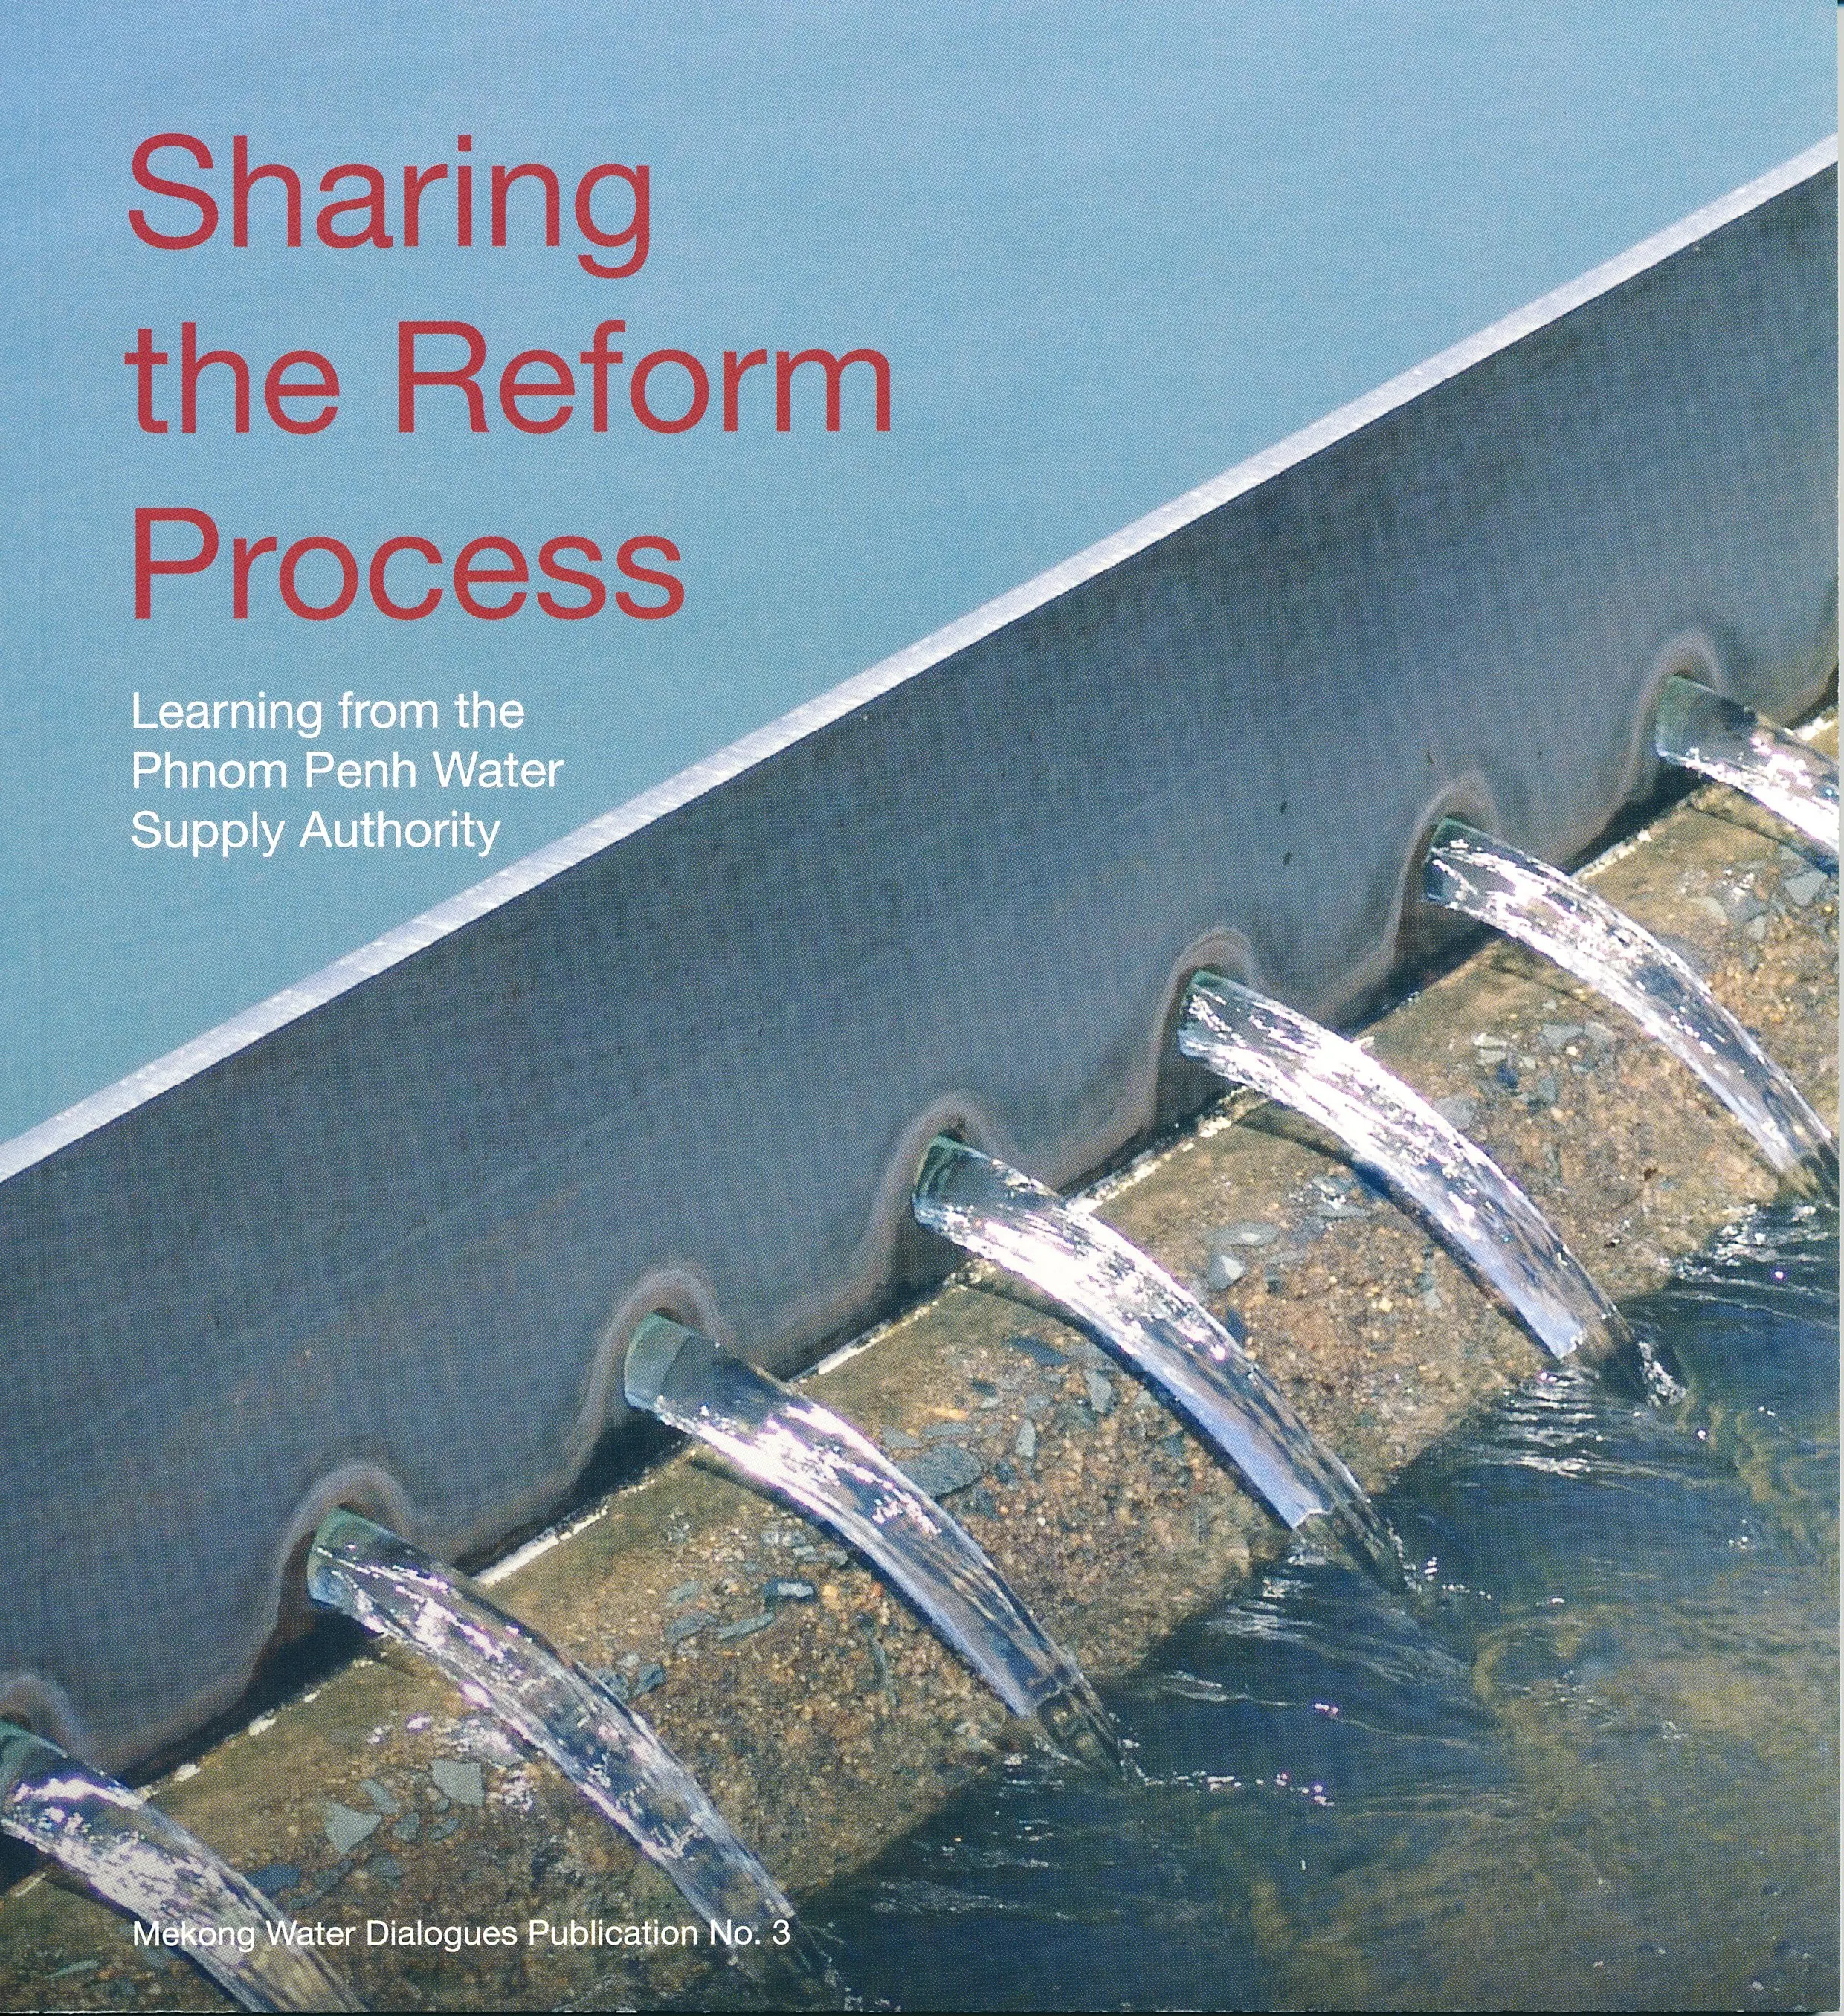 “Sharing the Reform Process” tells the story of reforms undertaken within the Phnom Penh Water Supply Authority